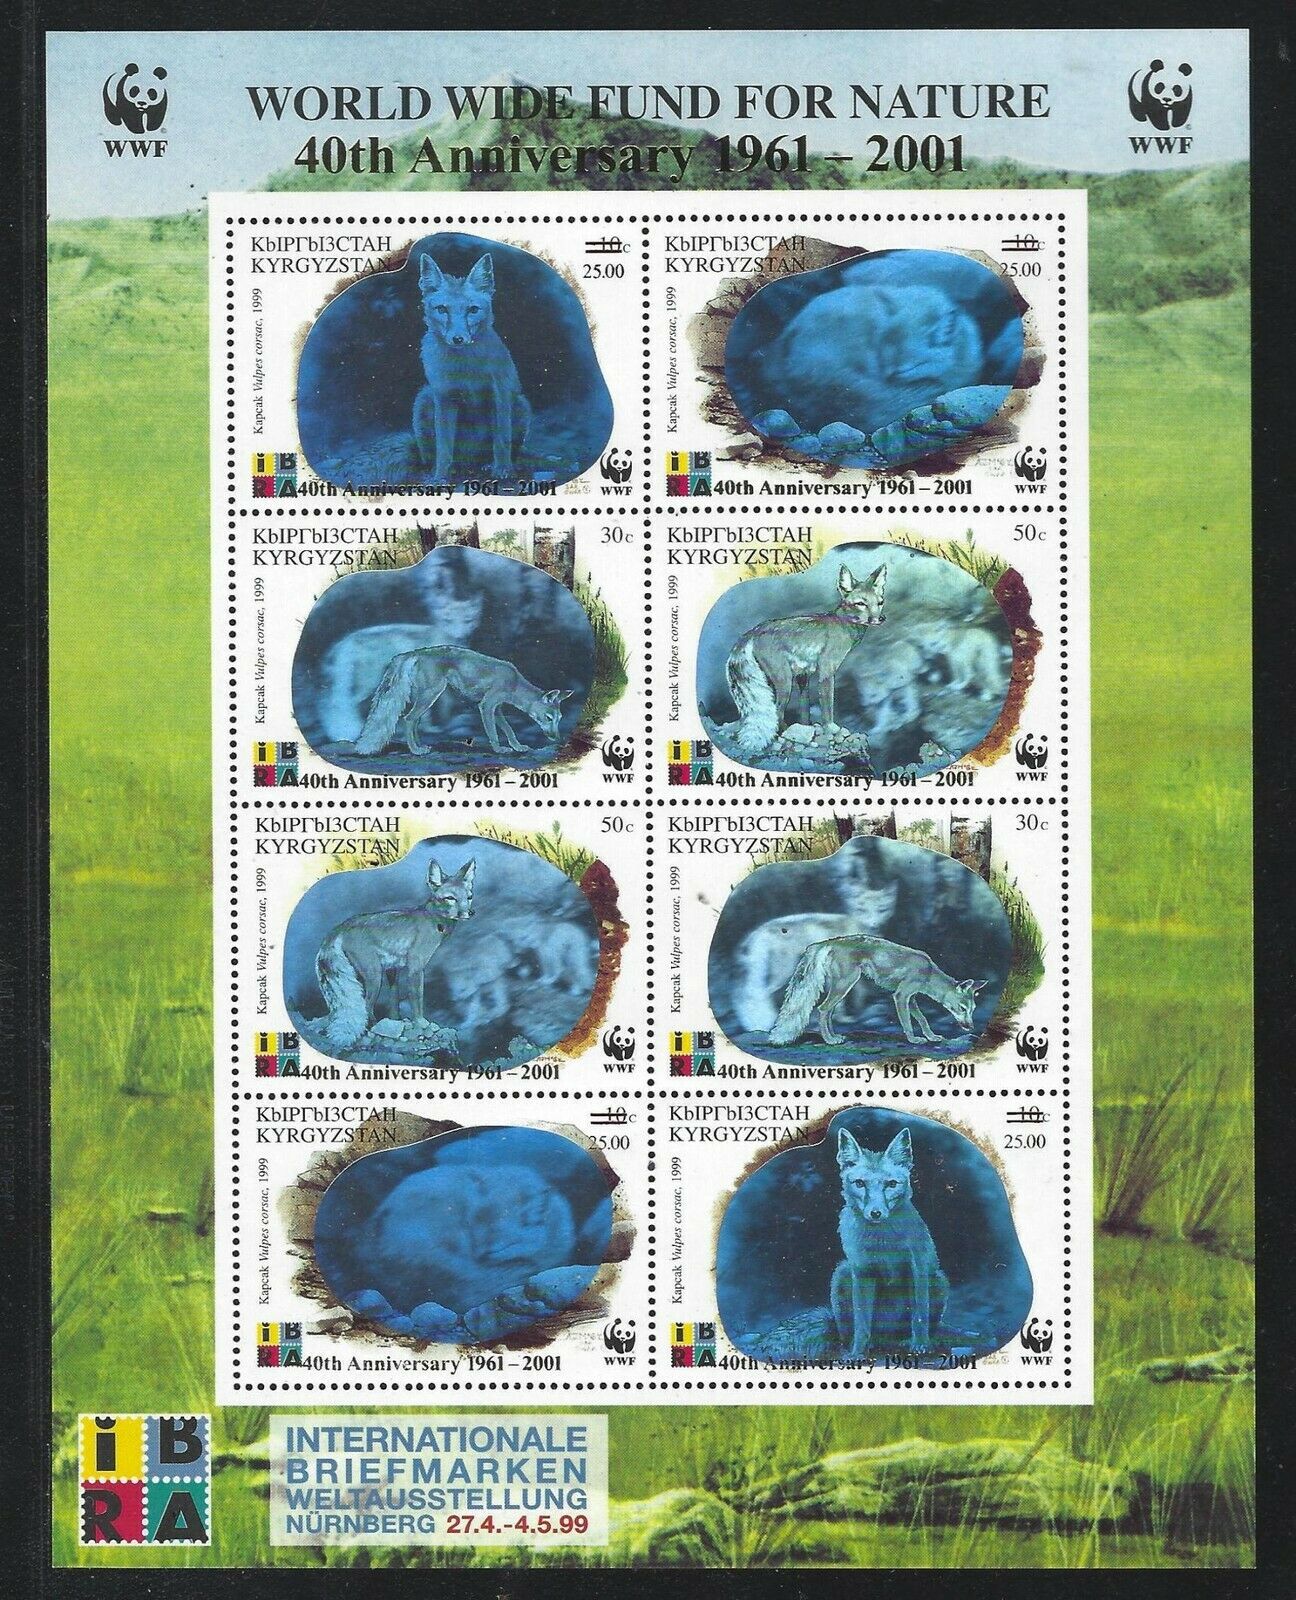 2011 Kyrgyzstan Scott #384 - Surcharged Wwf Sheet With 2 Blocks Of 4 - Mnh